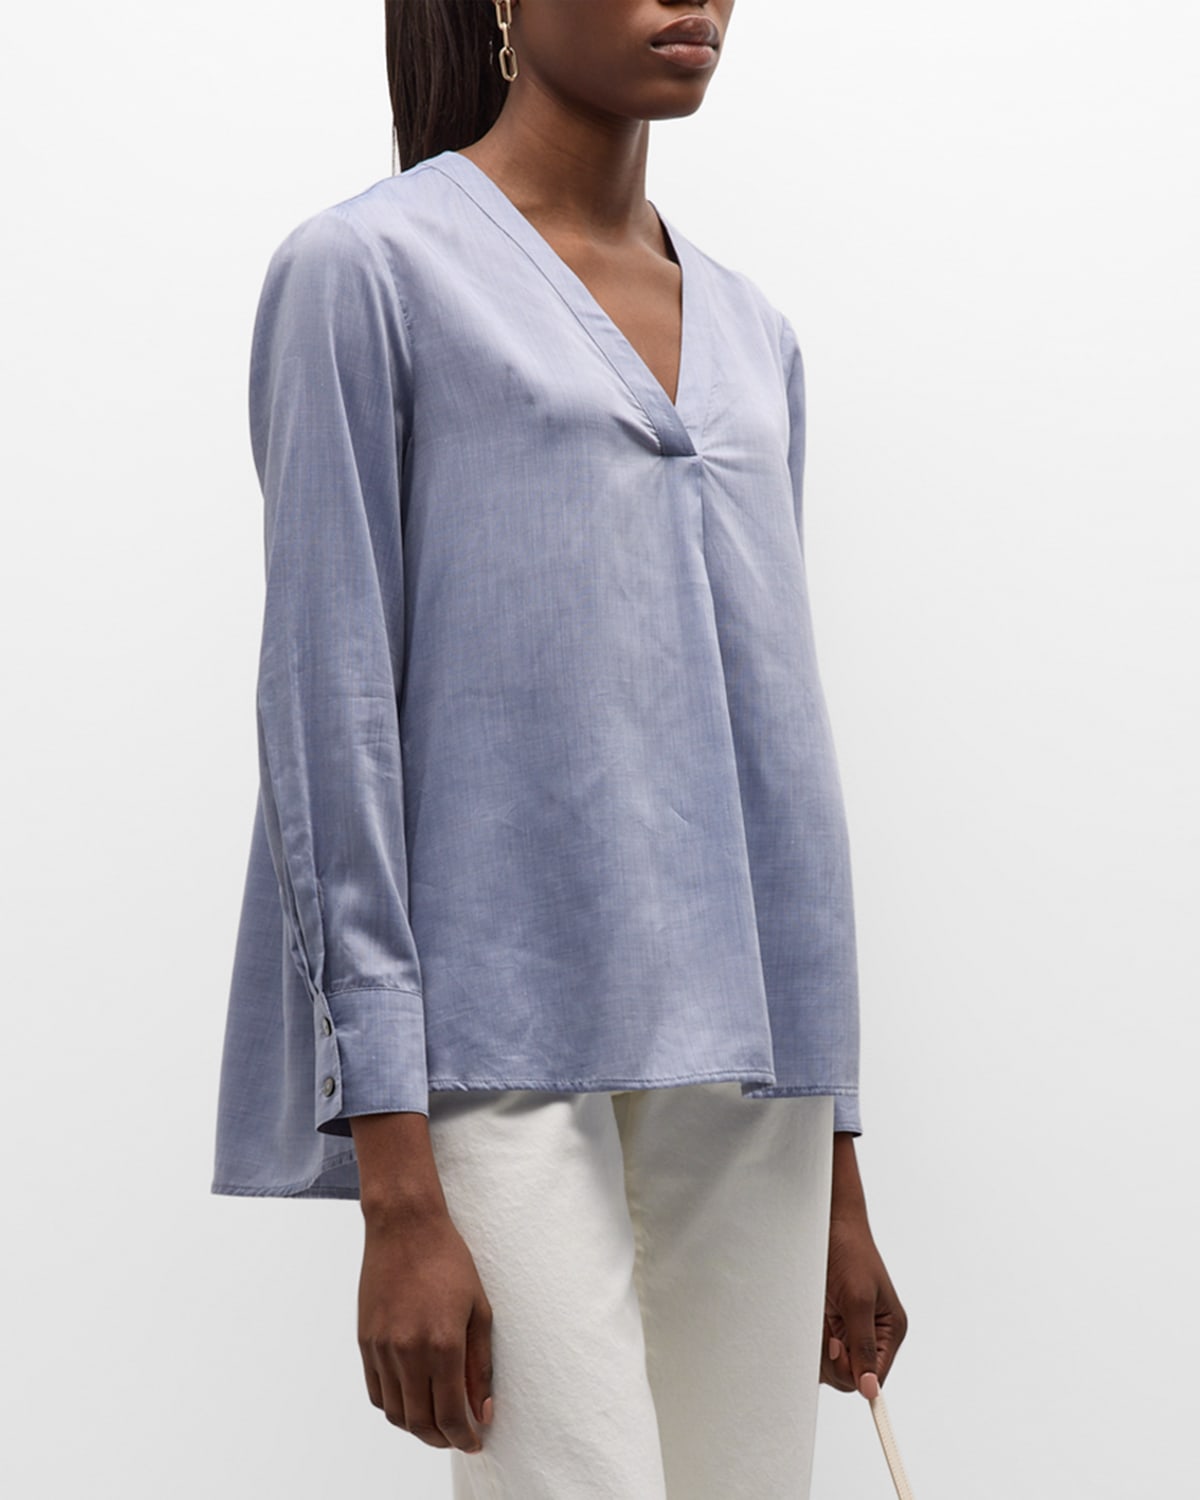 HARSHMAN CASSIAN HIGH-LOW PLEATED V-NECK BLOUSE